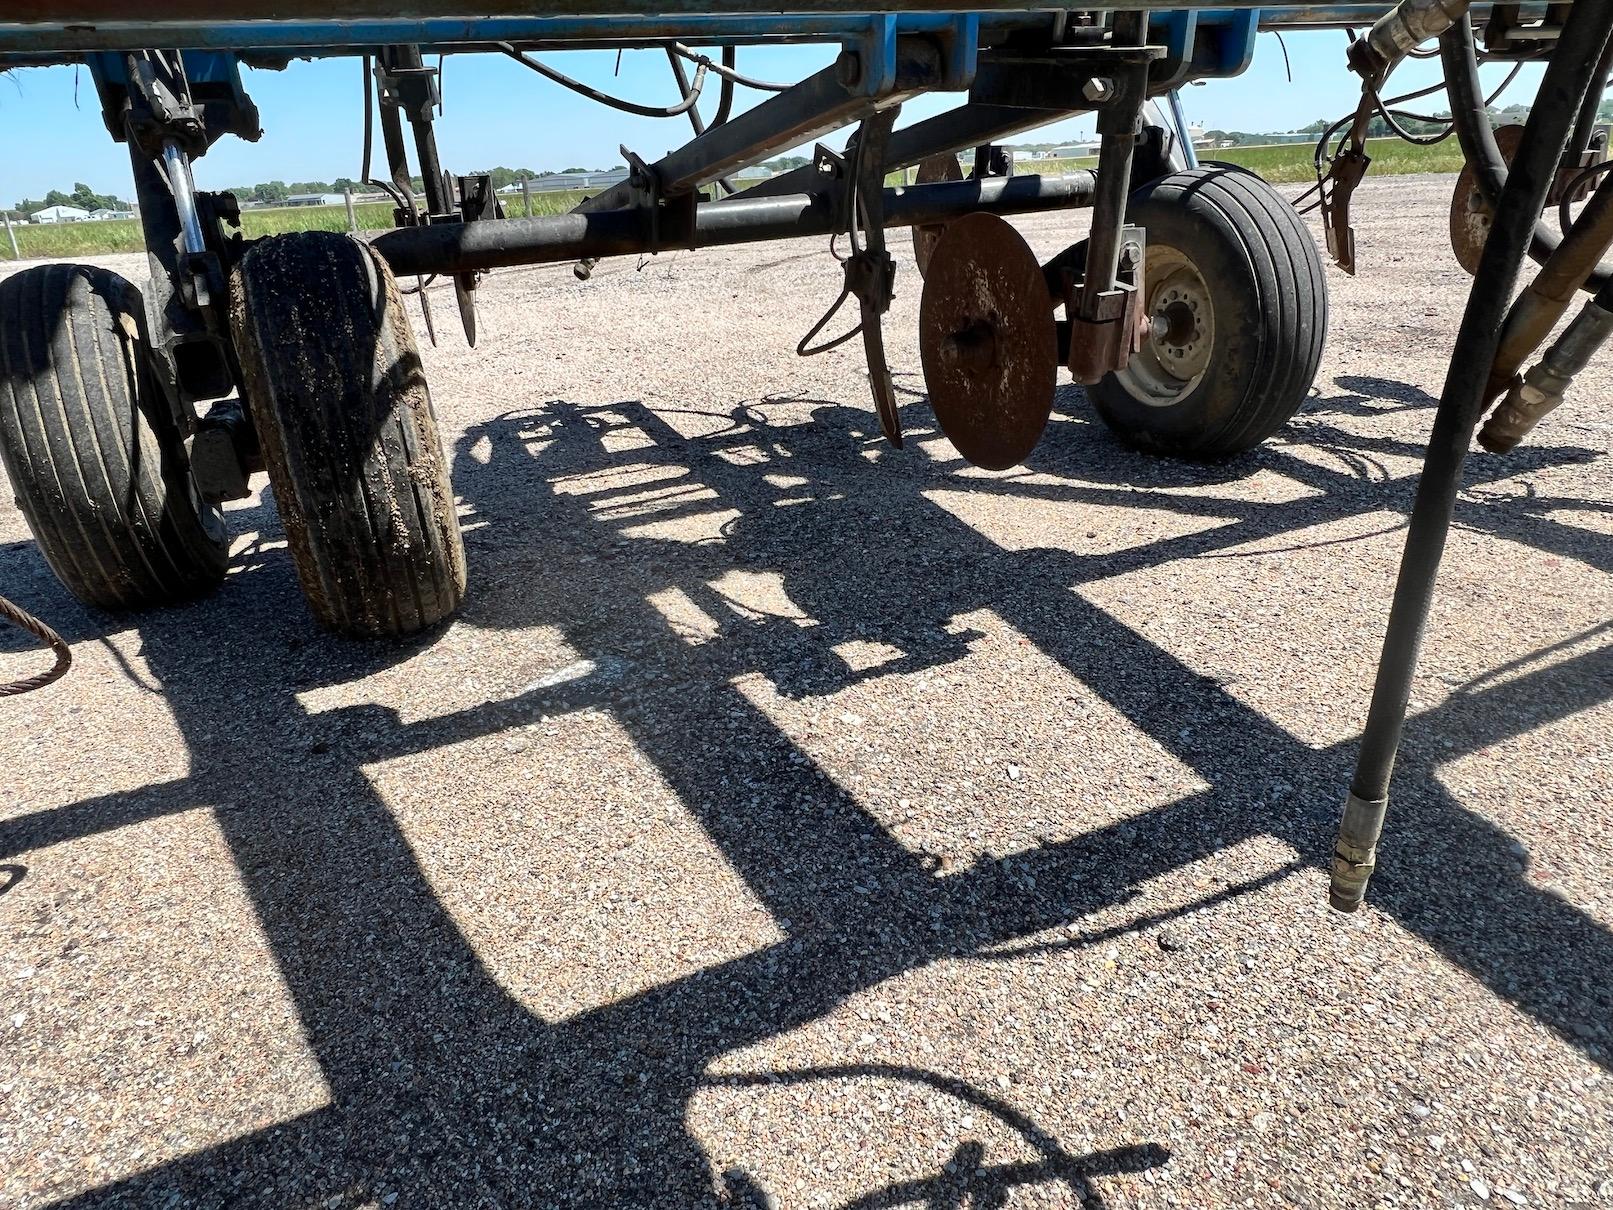 Shop-Built 15-Shank Pull-Type Anhydrous Ammonia Applicator